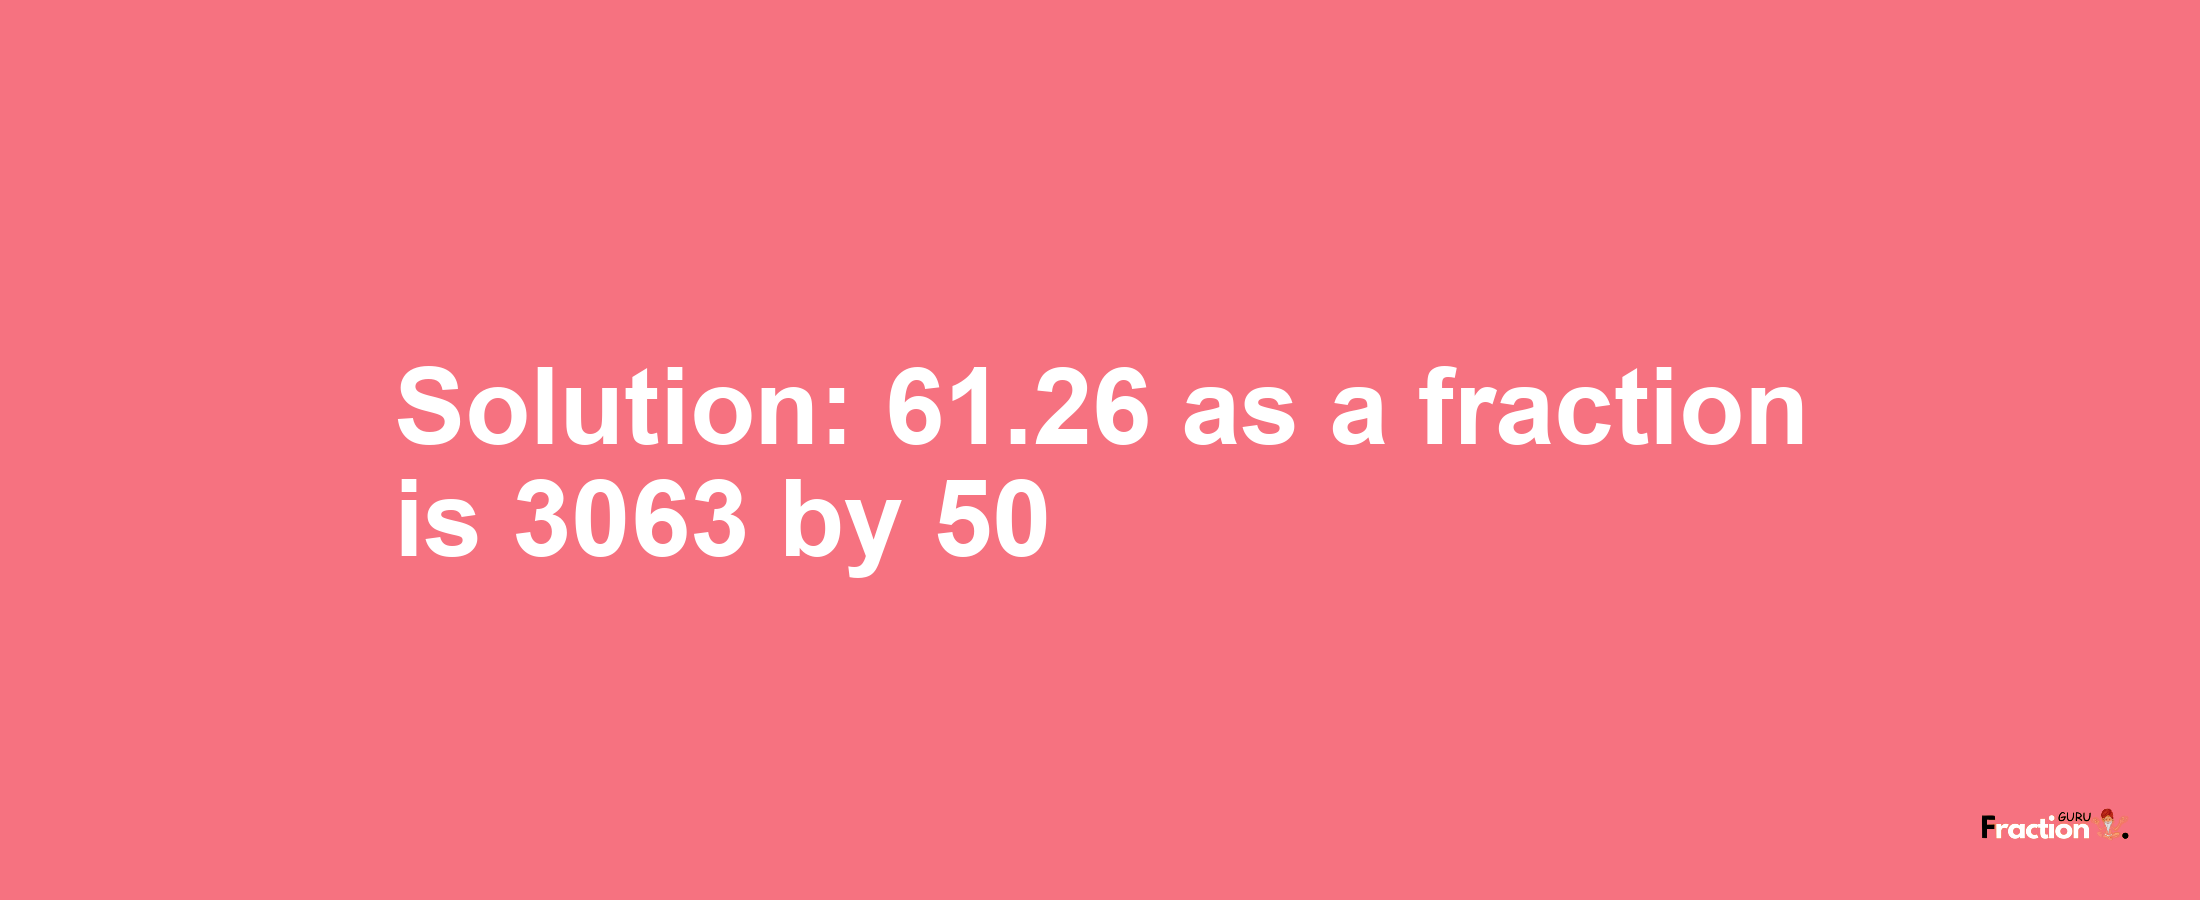 Solution:61.26 as a fraction is 3063/50